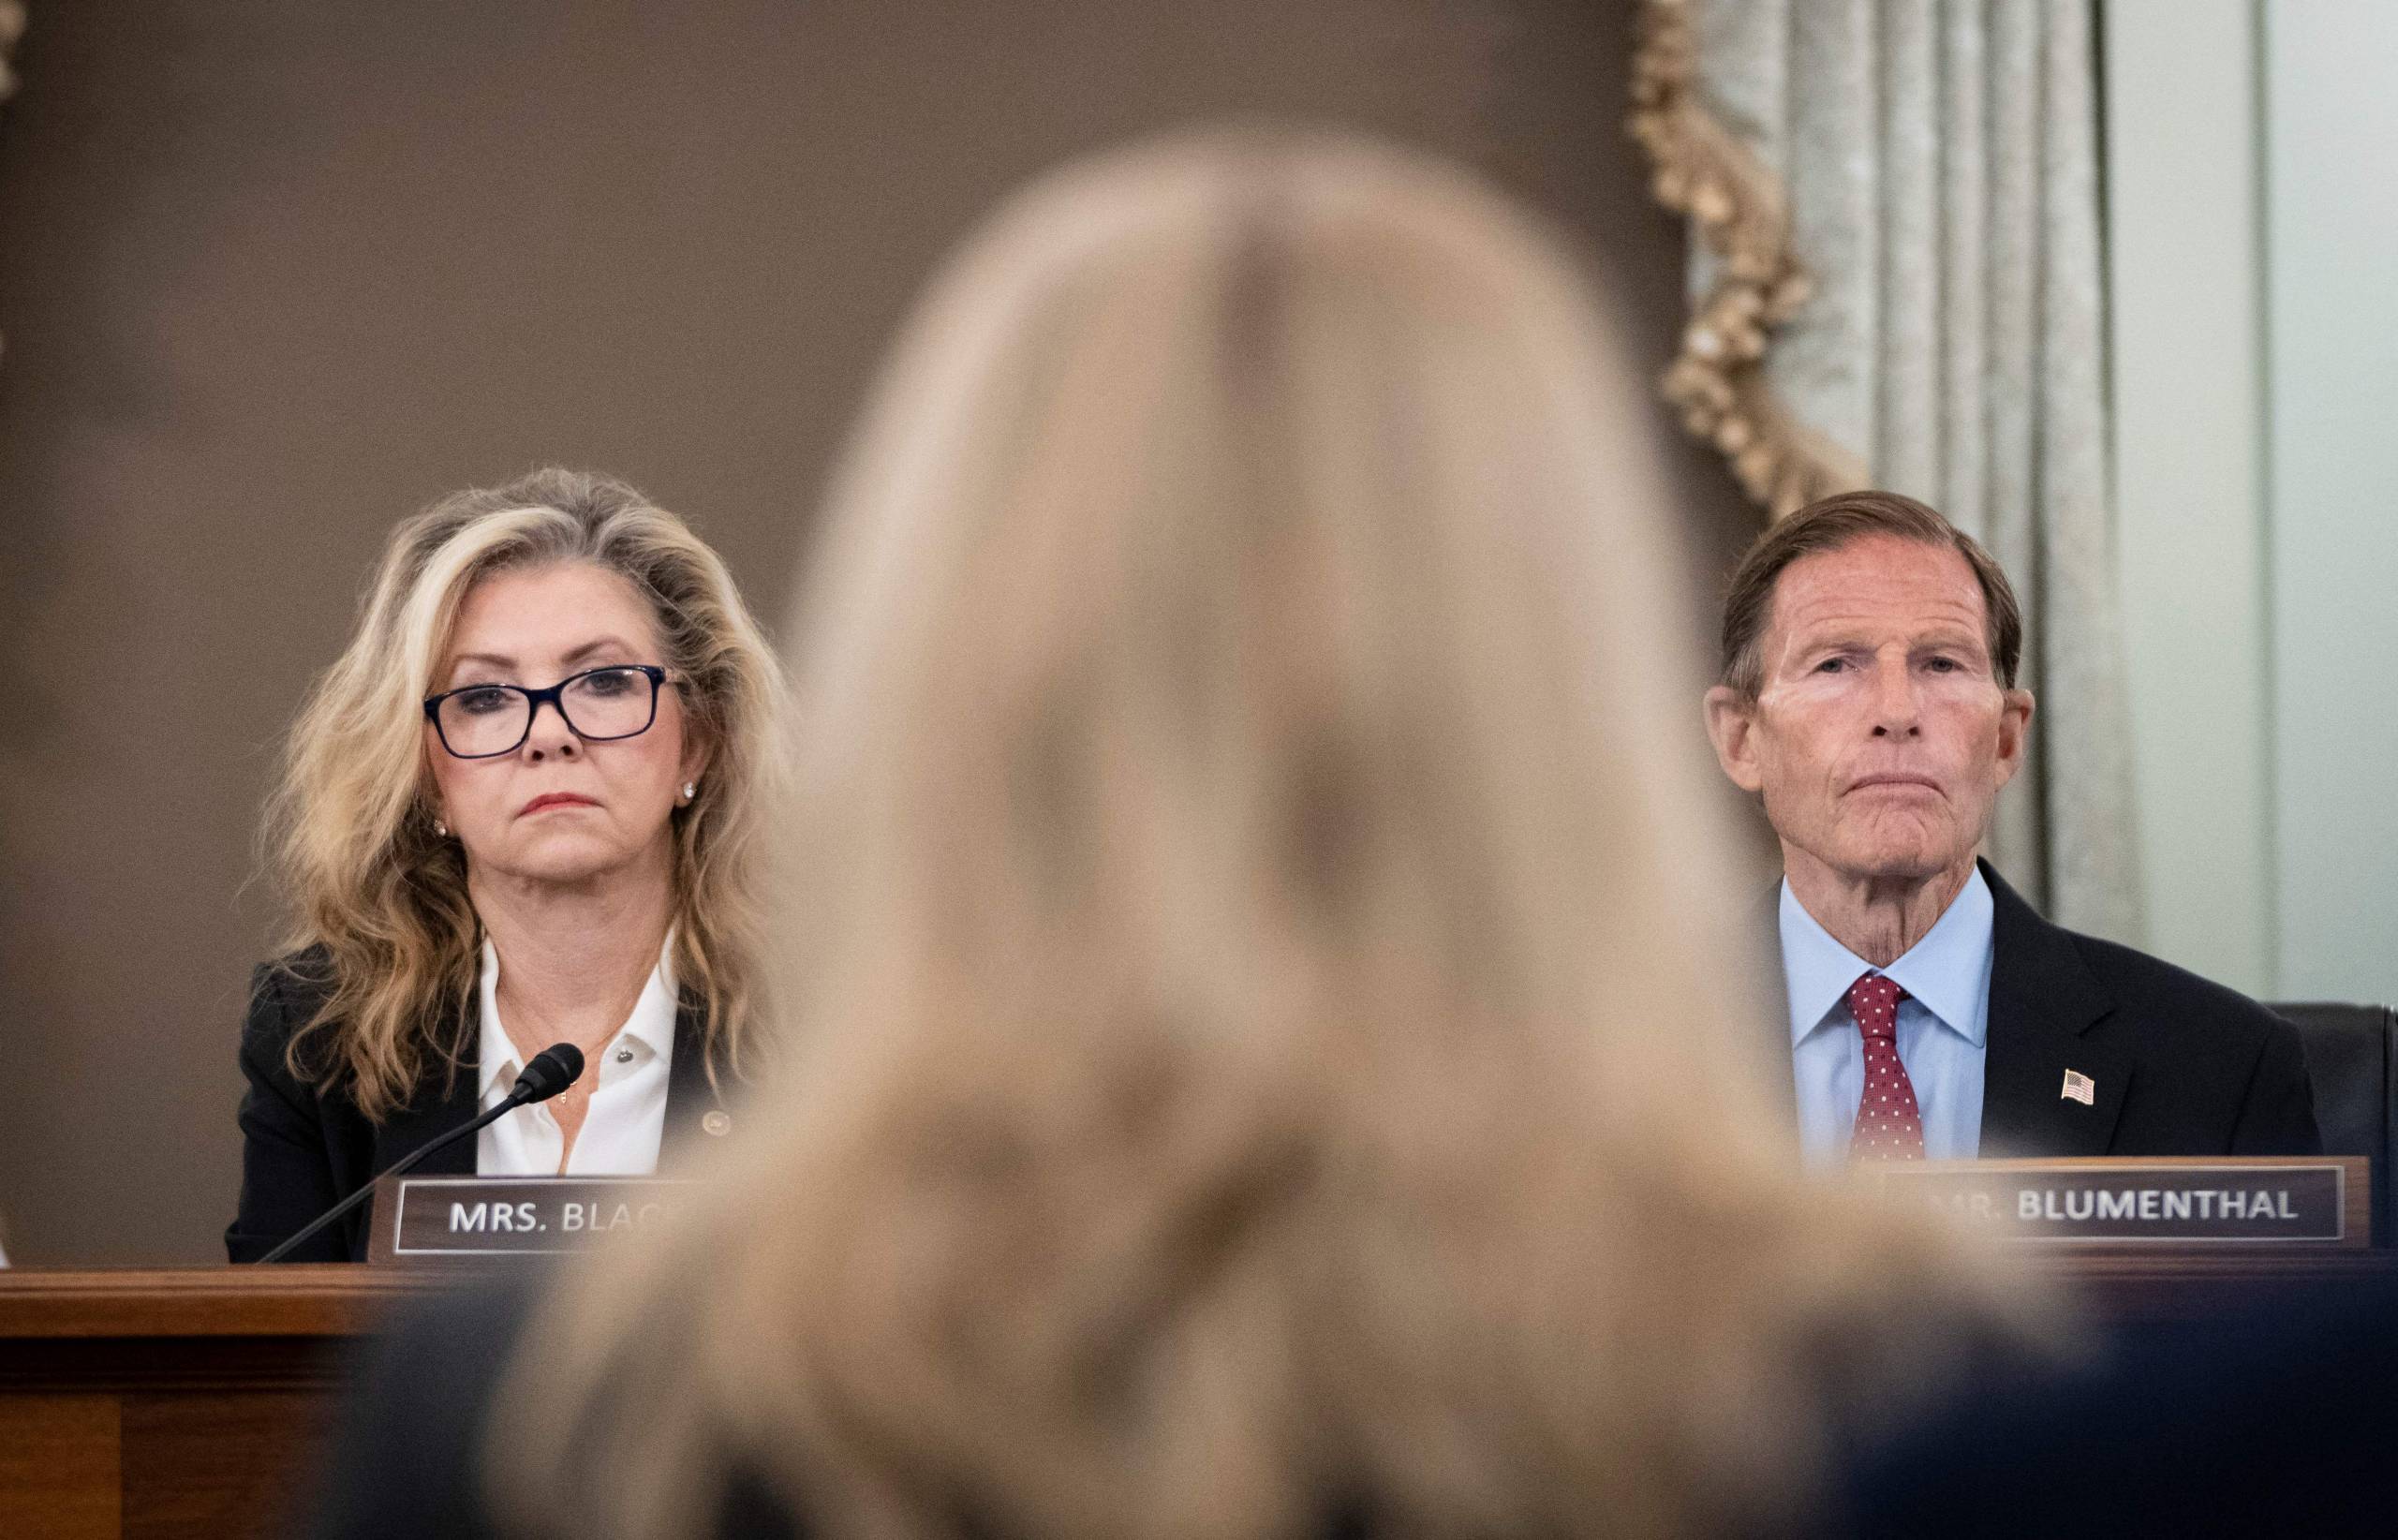 In the foreground is the back of Frances Haugen's out-of-focus head, and seated beyond her, and in focus, are Senators Marsha Blackburn and Richard Blumenthal on either side of her head.